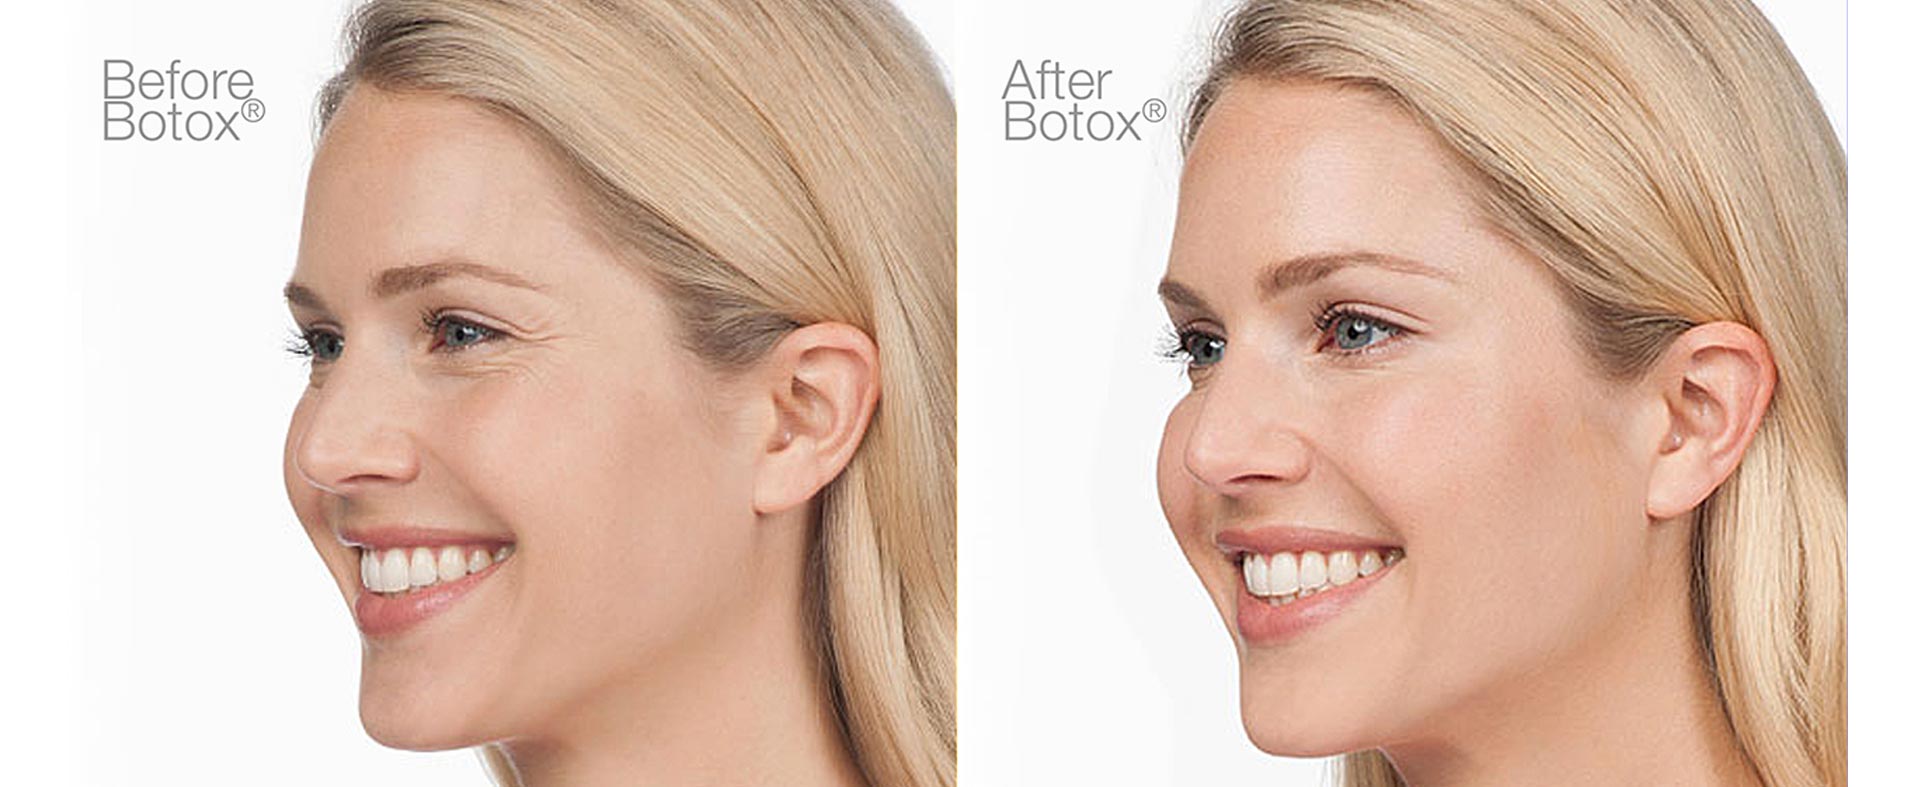 Botox injection before and after